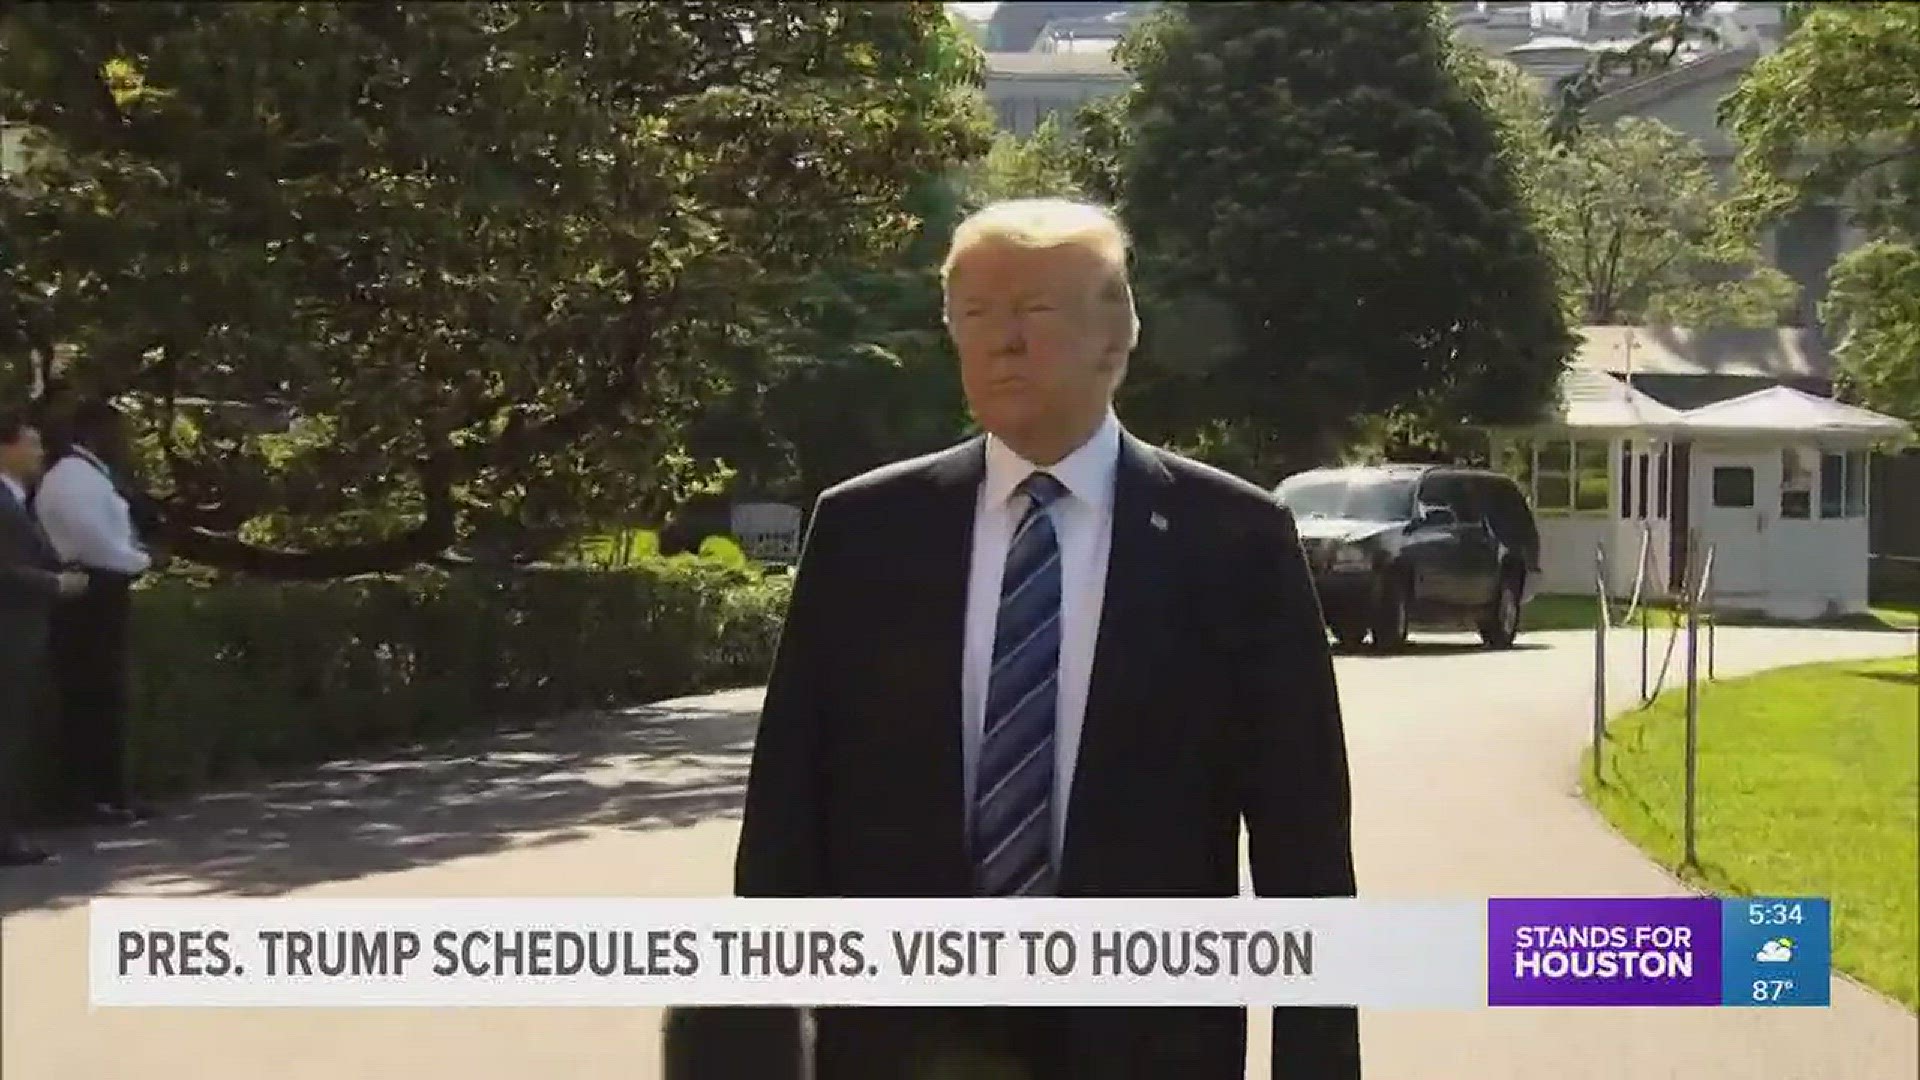 President Trump is scheduled to come to Houston this Thursday. He'll headline a $5,000-a-plate fundraiser for GOP Senate candidates.